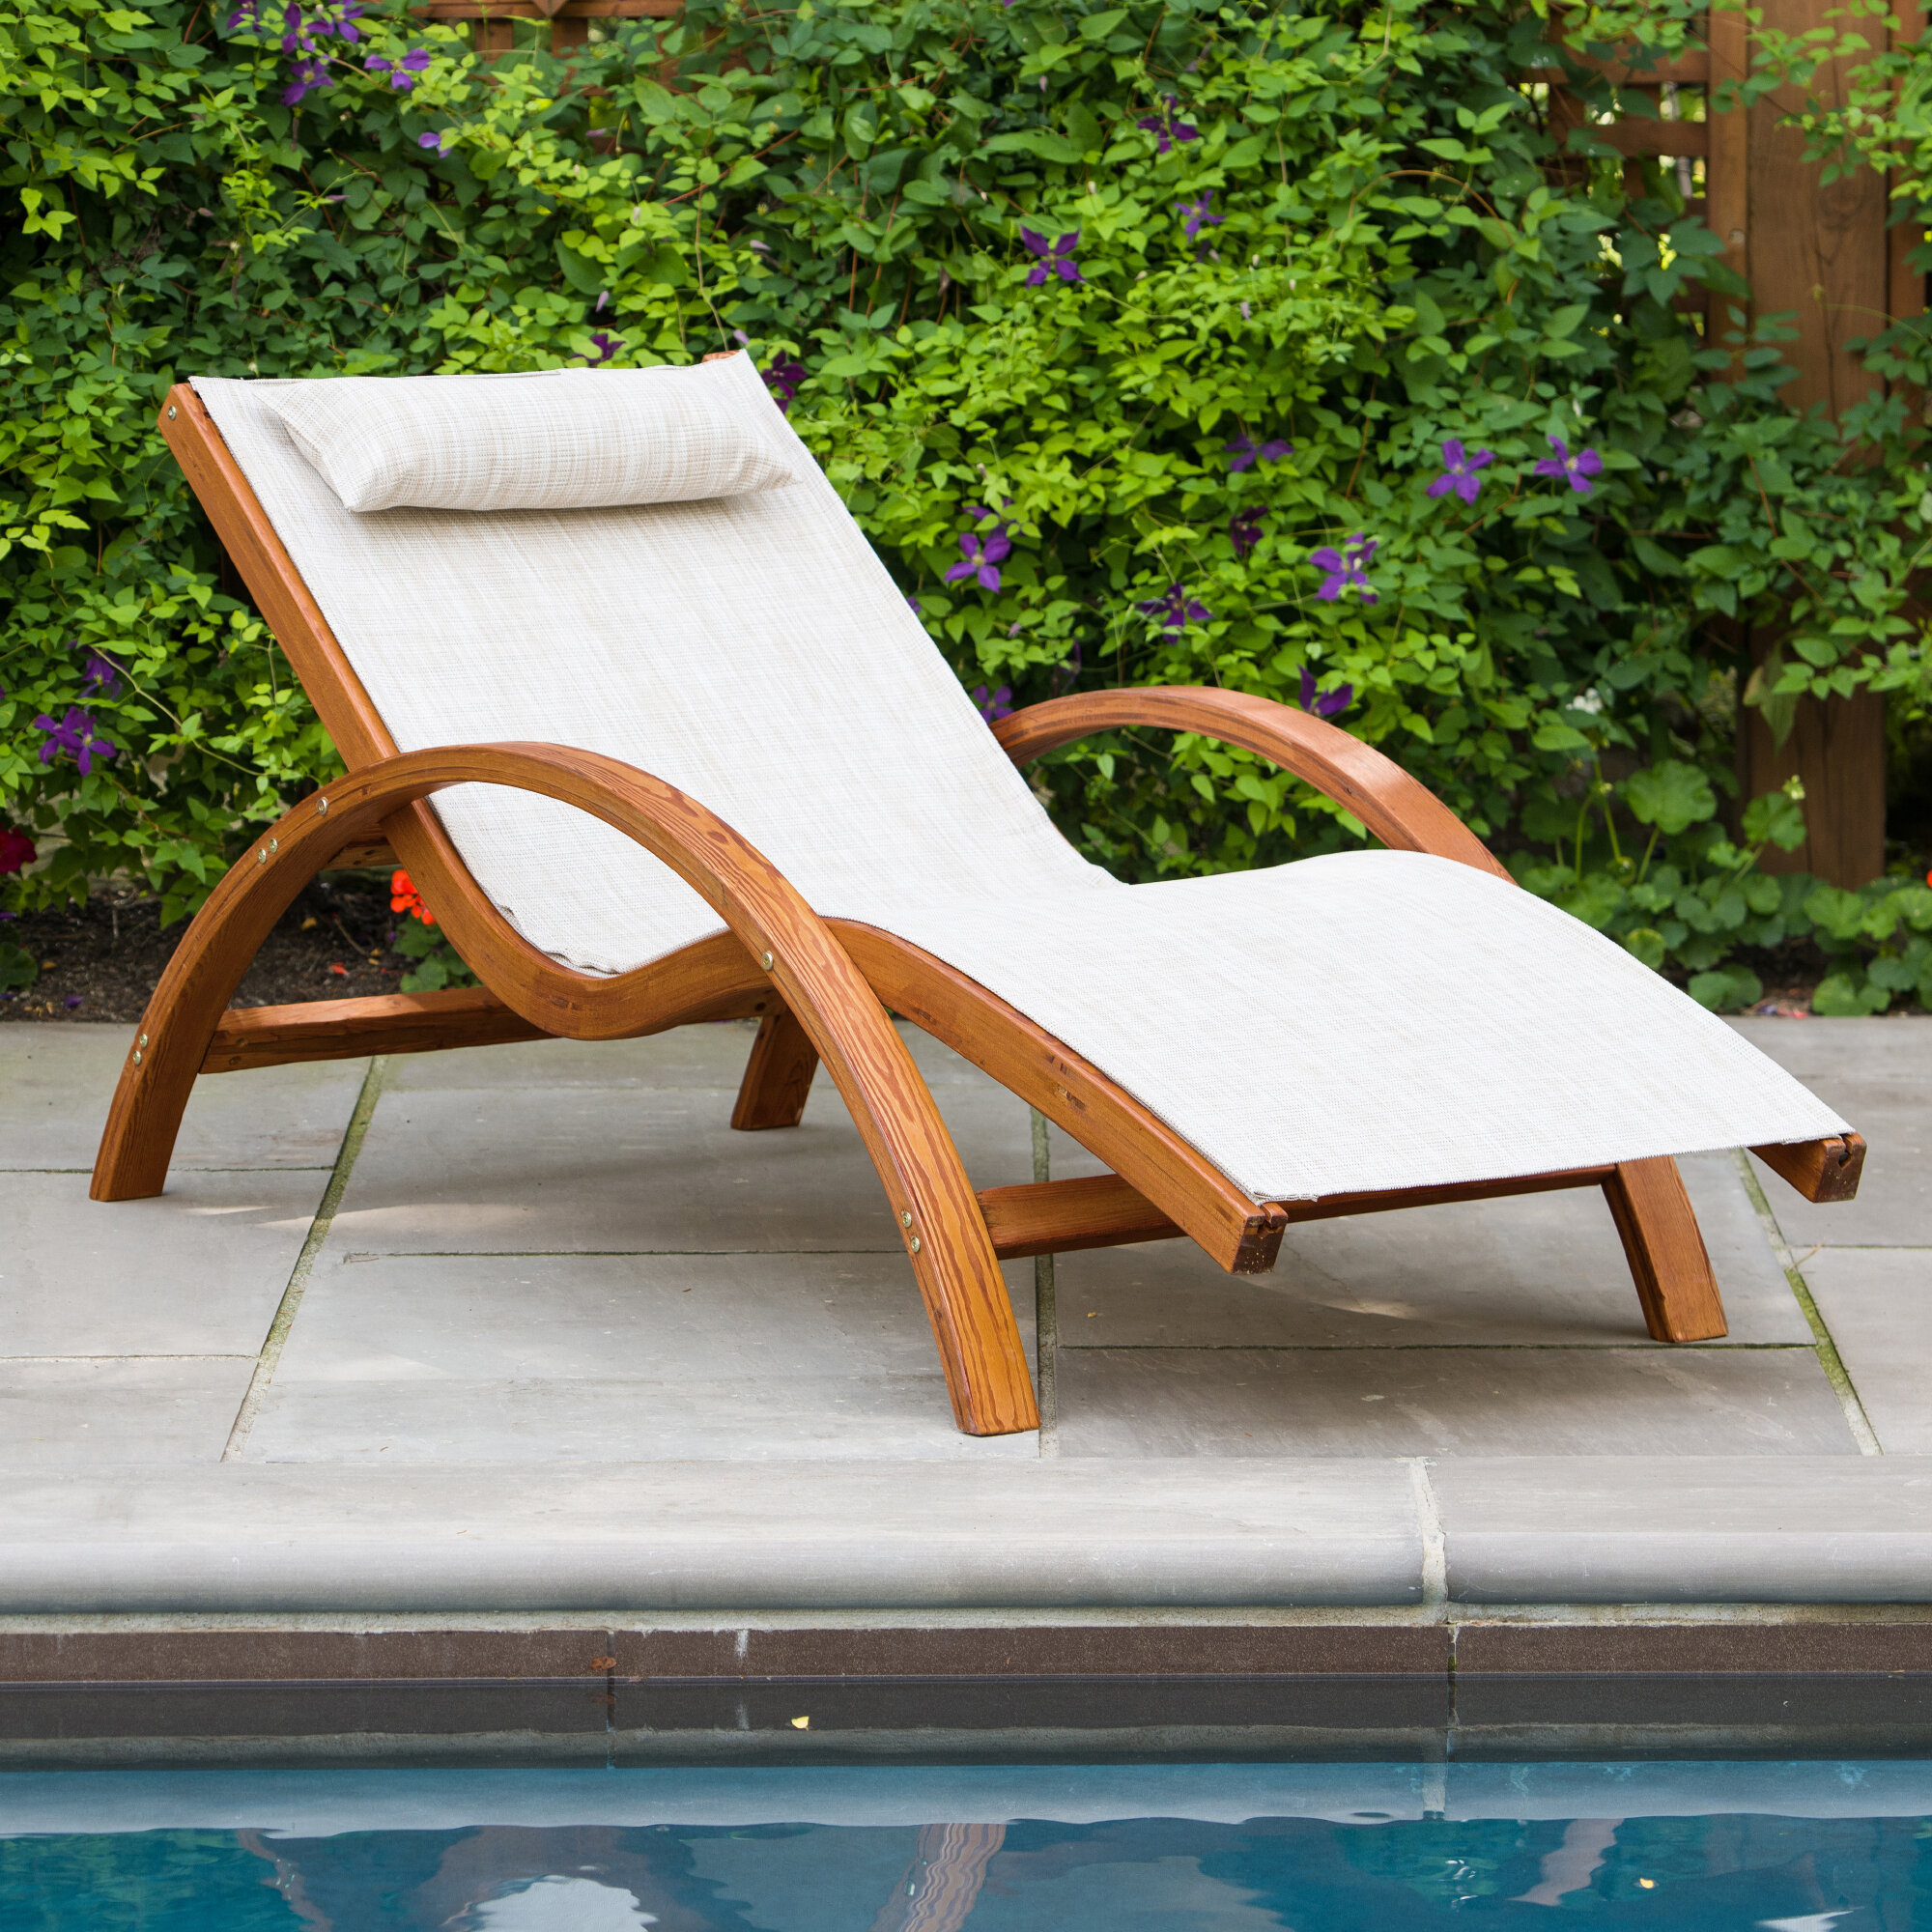 Leisure Season CL7111-E Chaise Pull-Out Tray Patio-Lounge-Chairs Medium Brown 